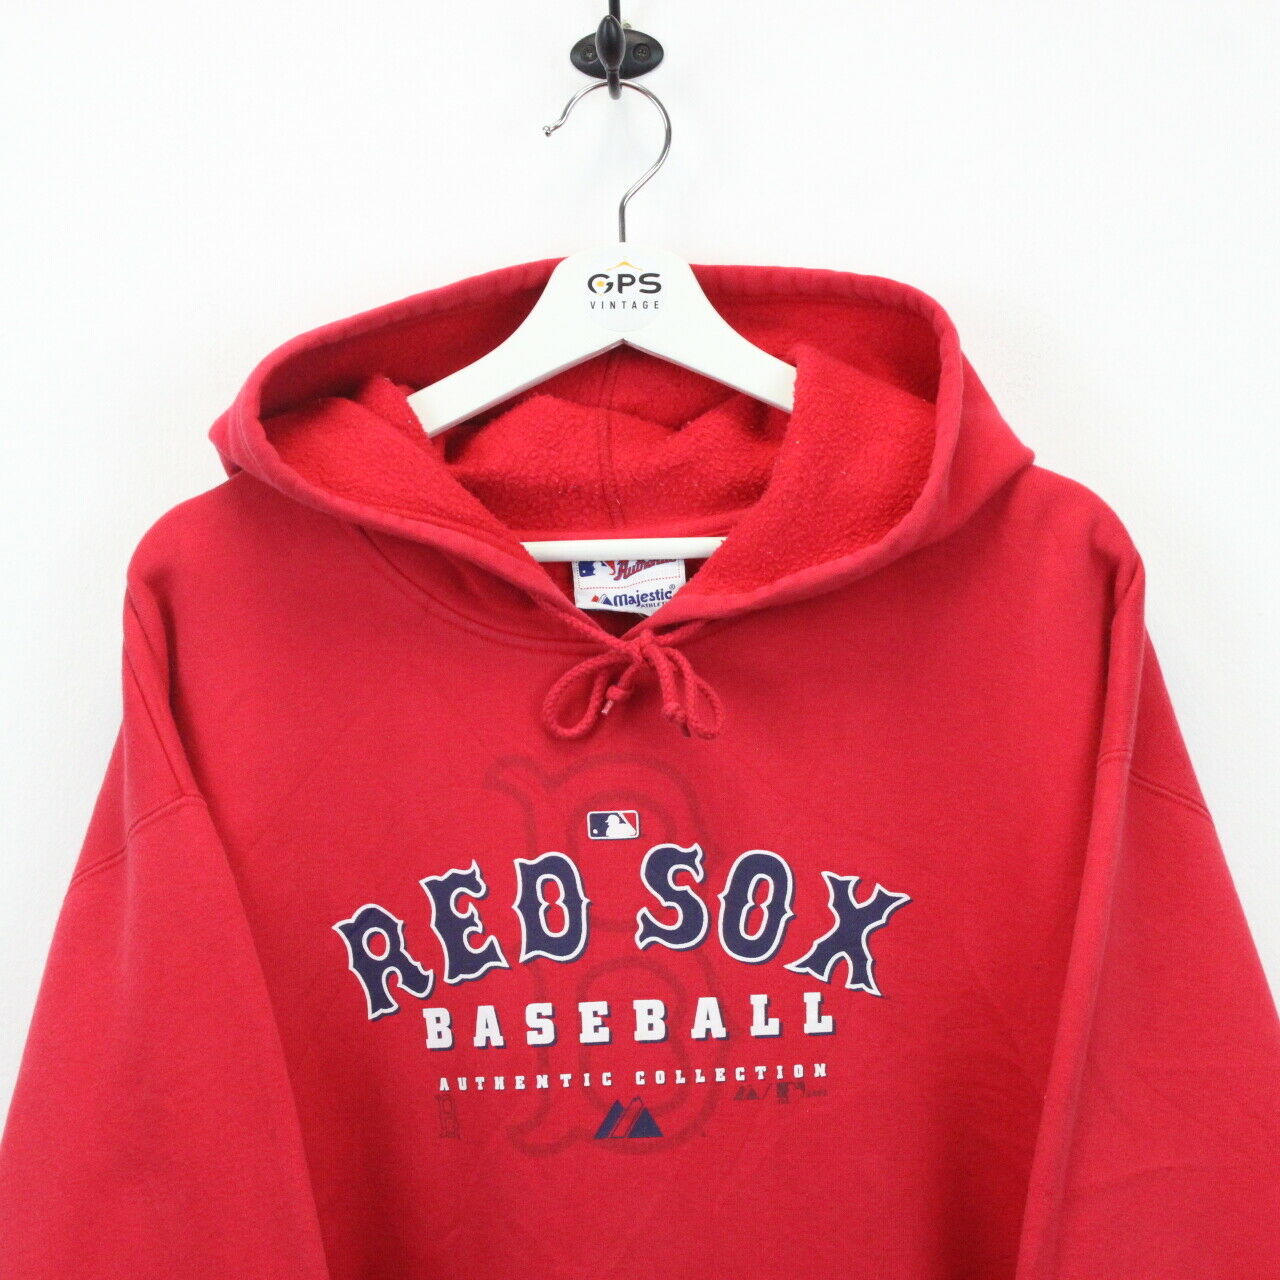 Sweater hoodie MLB Red Sox Mens Fashion Tops  Sets Hoodies on Carousell